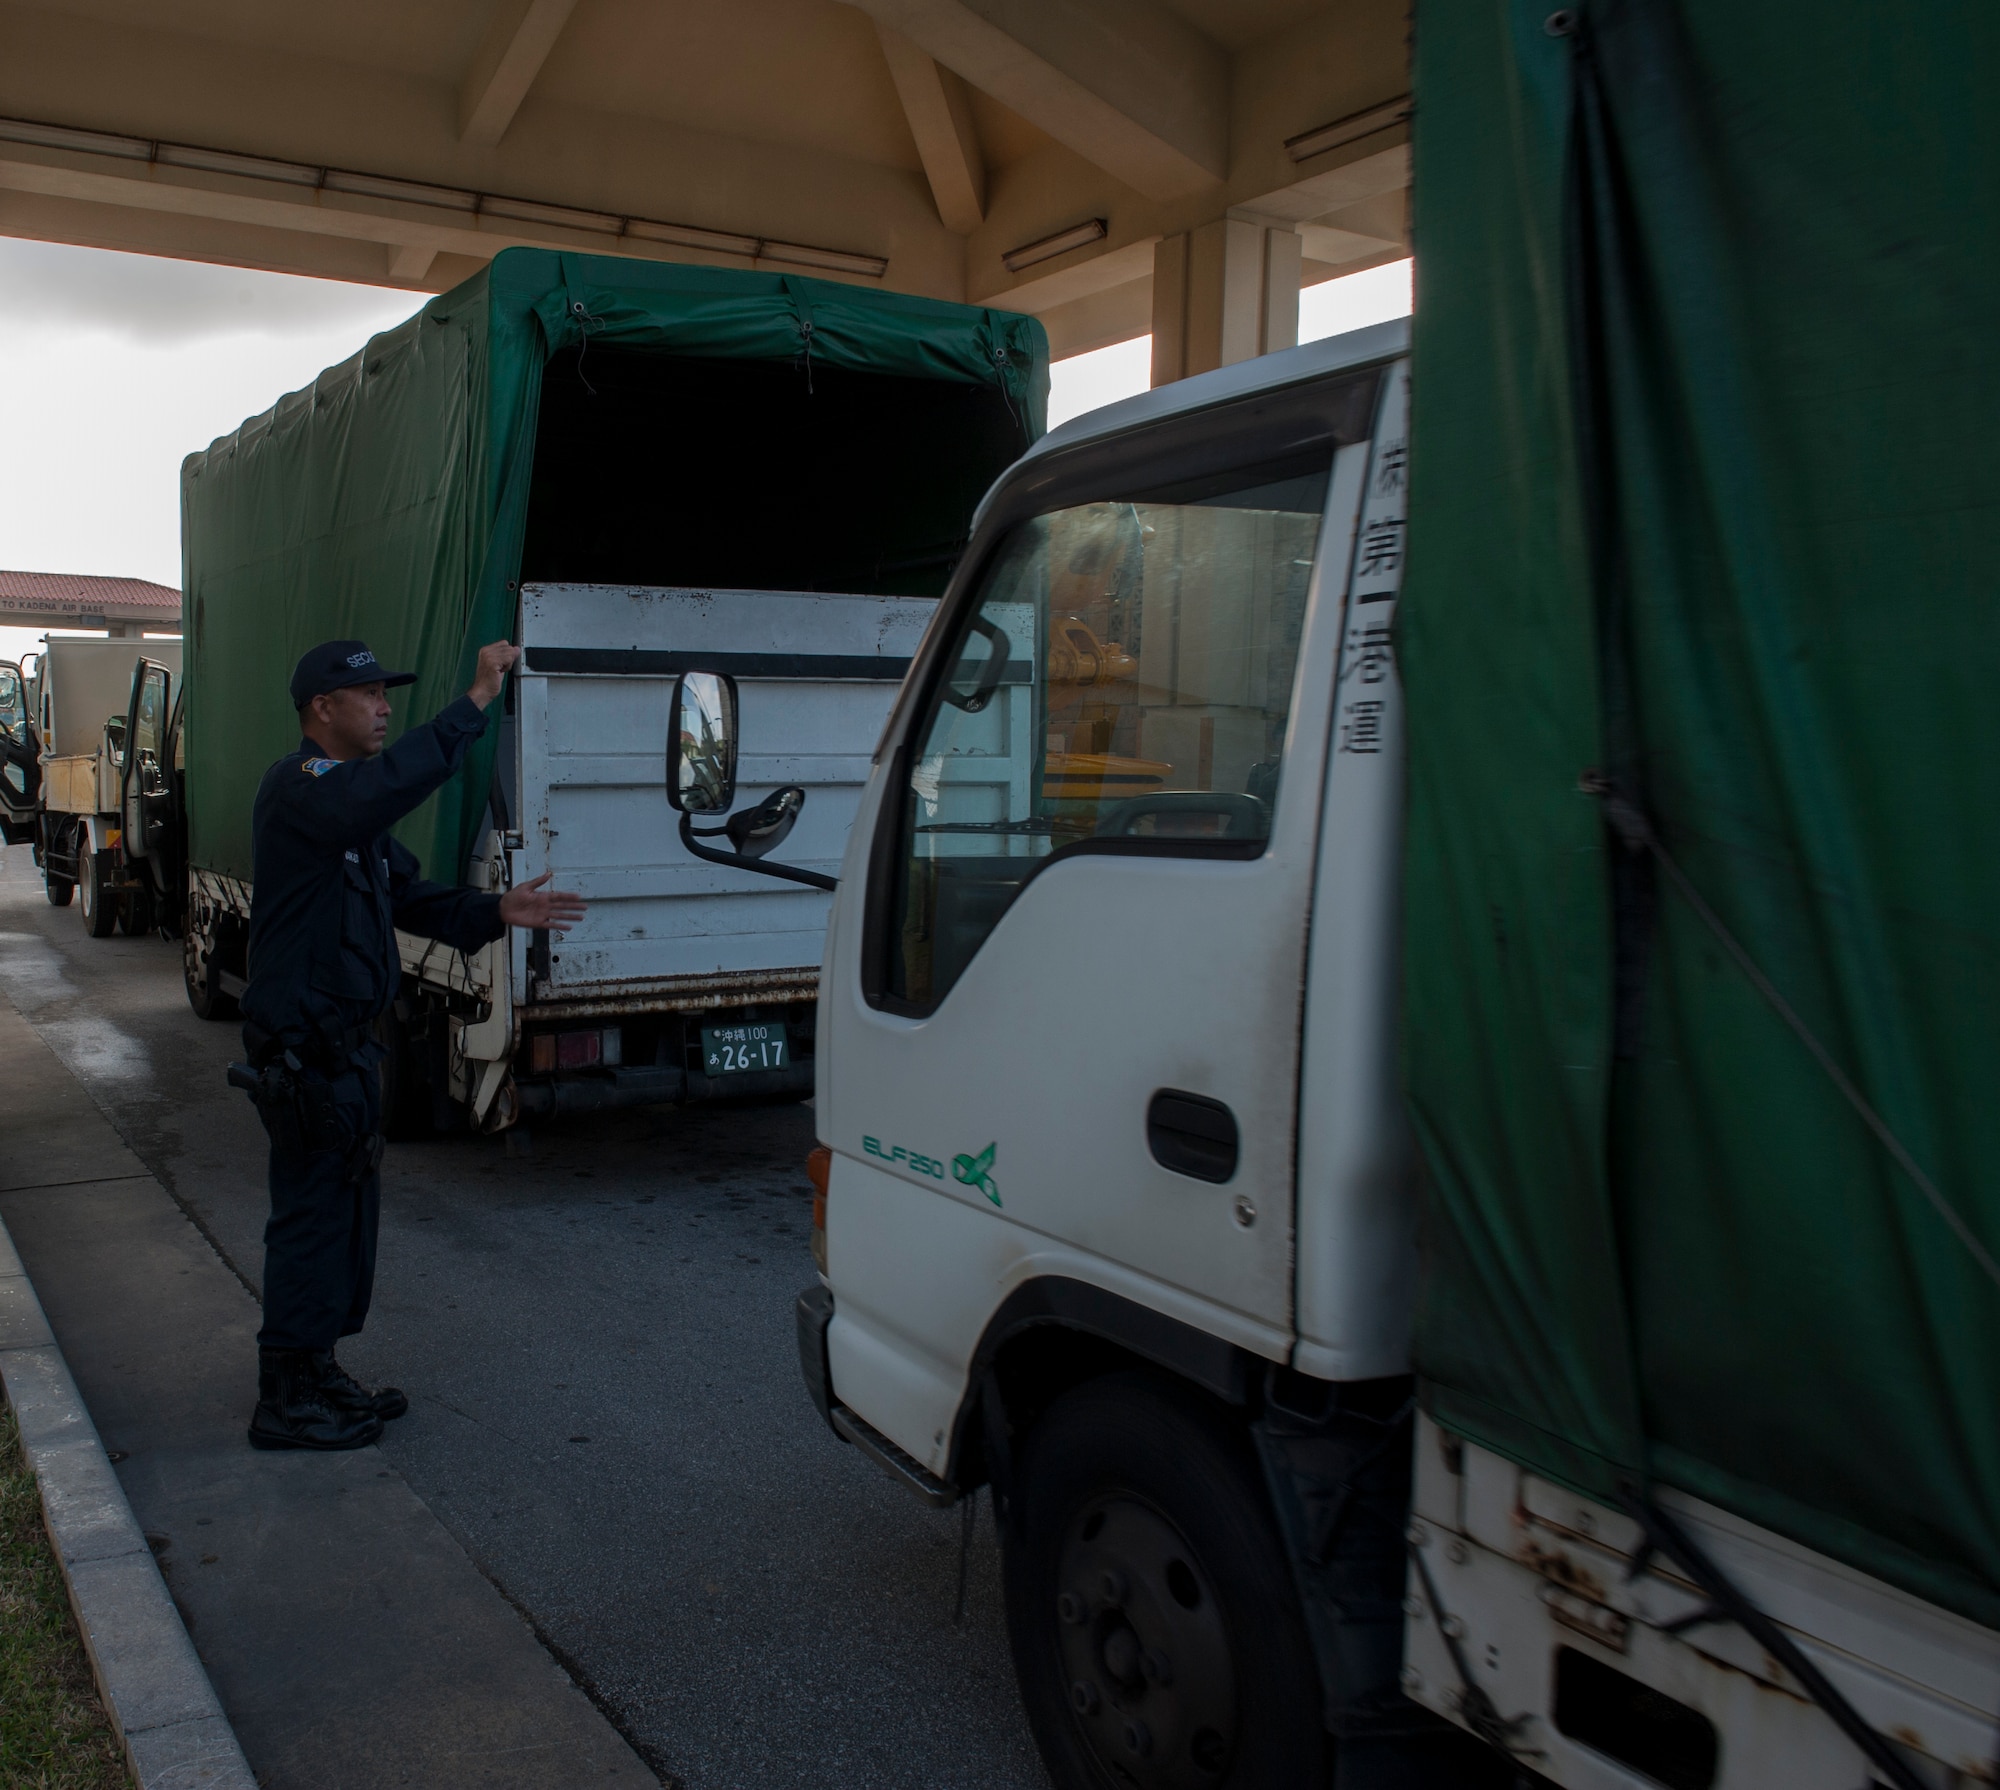 Tomohiro Nakada, 18th Security Forces Squadron member, guides a truck to the search pit Nov. 10, 2015, at Kadena Air Base, Japan. Airmen from the Air Force Smart Operations for the 21st Century team on Kadena opened the search pit an hour earlier as a solution to process commercial trucks faster as they arrive on base. (U.S. Air Force photo by Airman 1st Class Lynette M. Rolen)